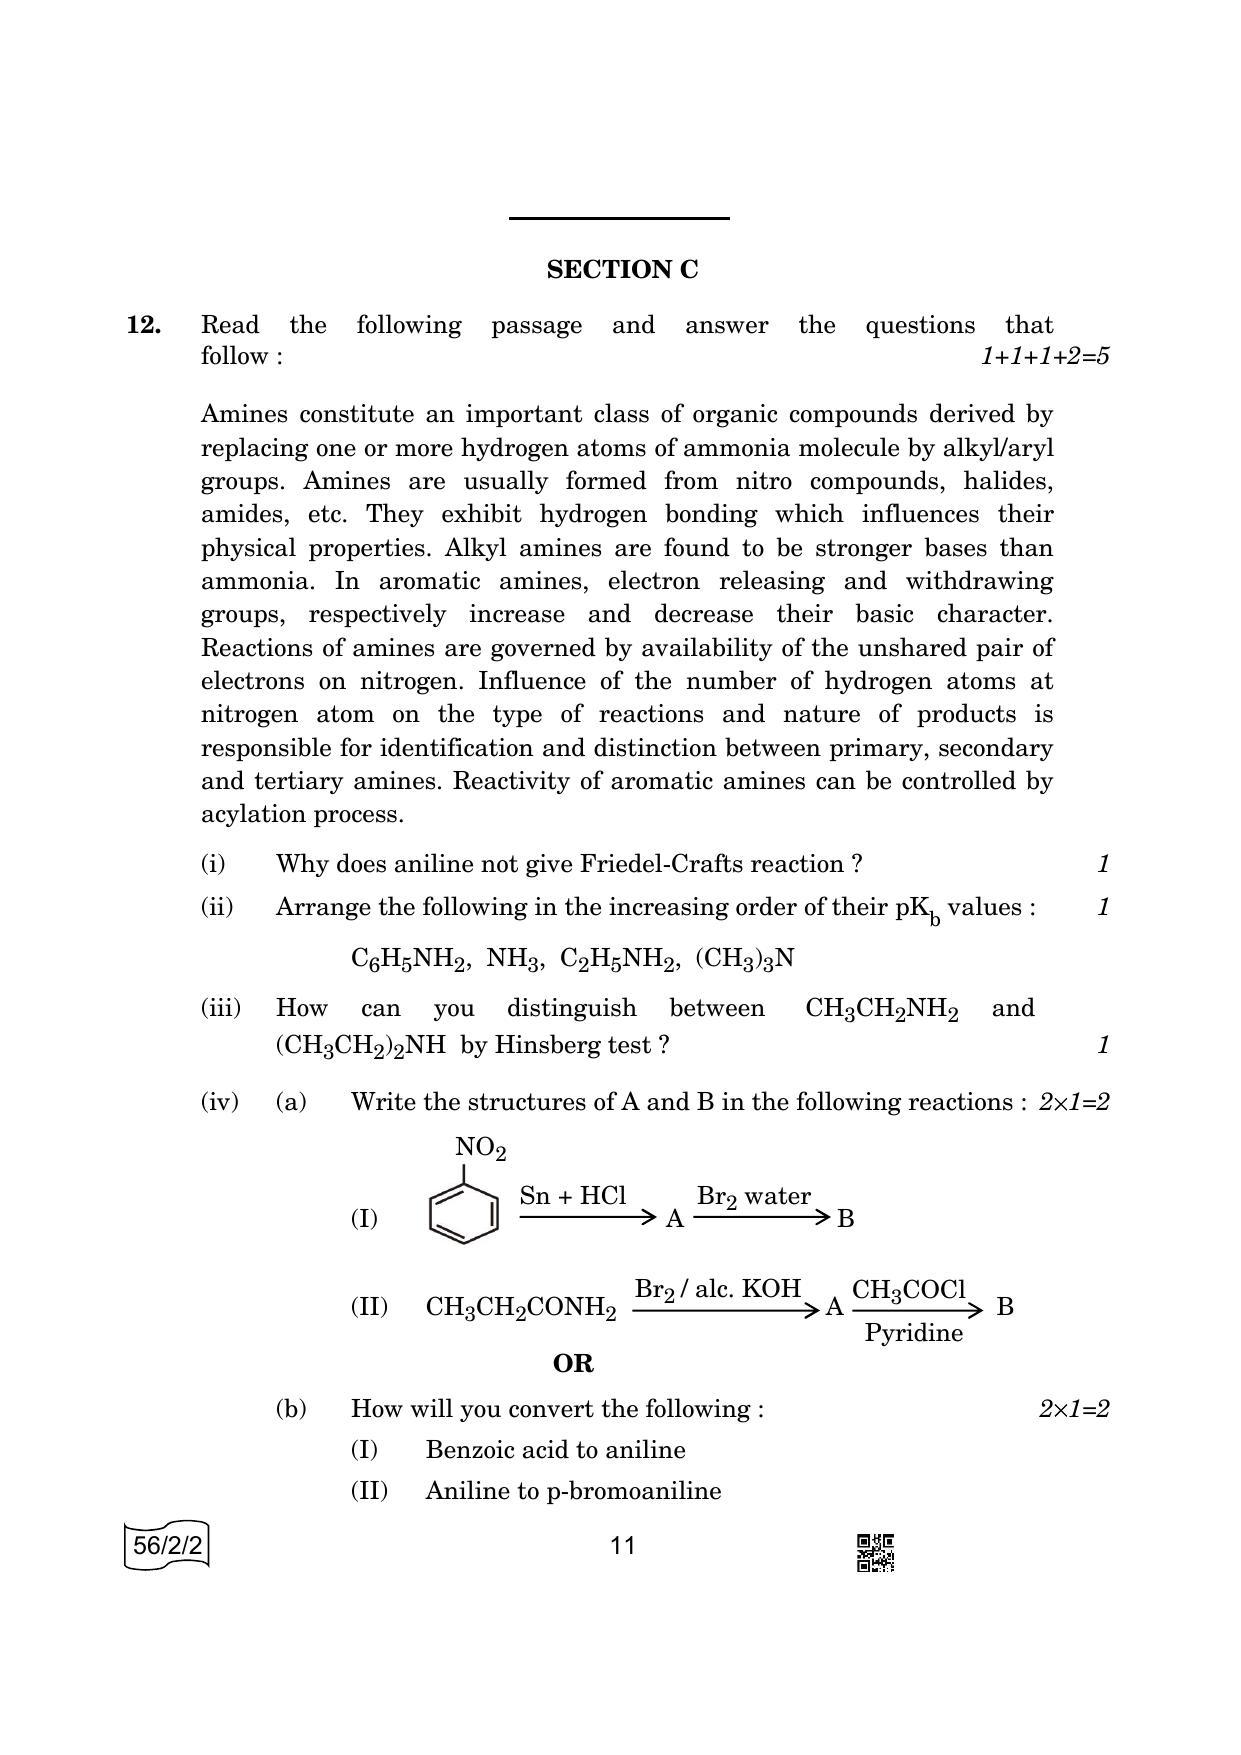 CBSE Class 12 56-2-2 Chemistry 2022 Question Paper - Page 11